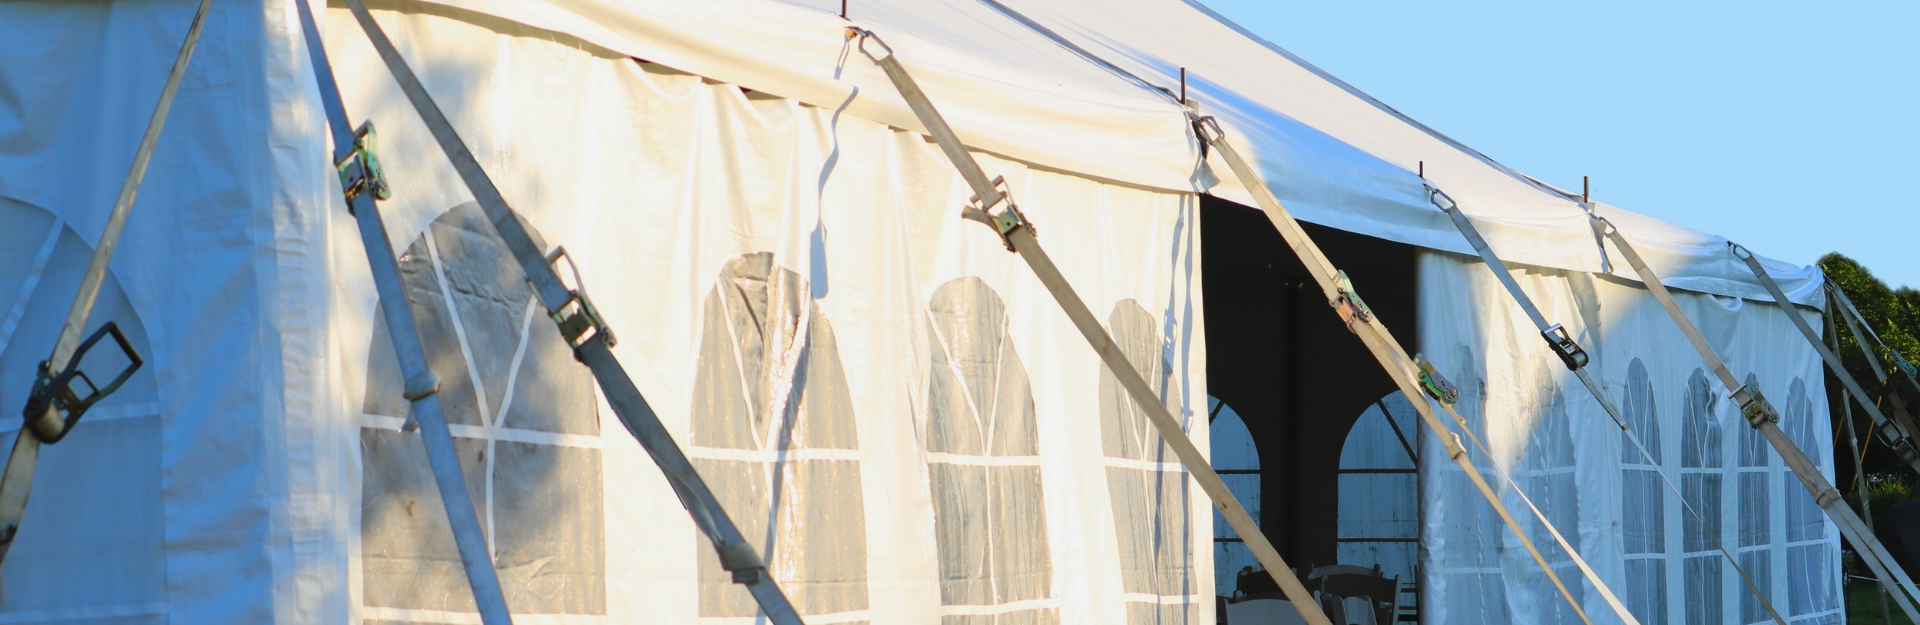 White frame tent with sidewall